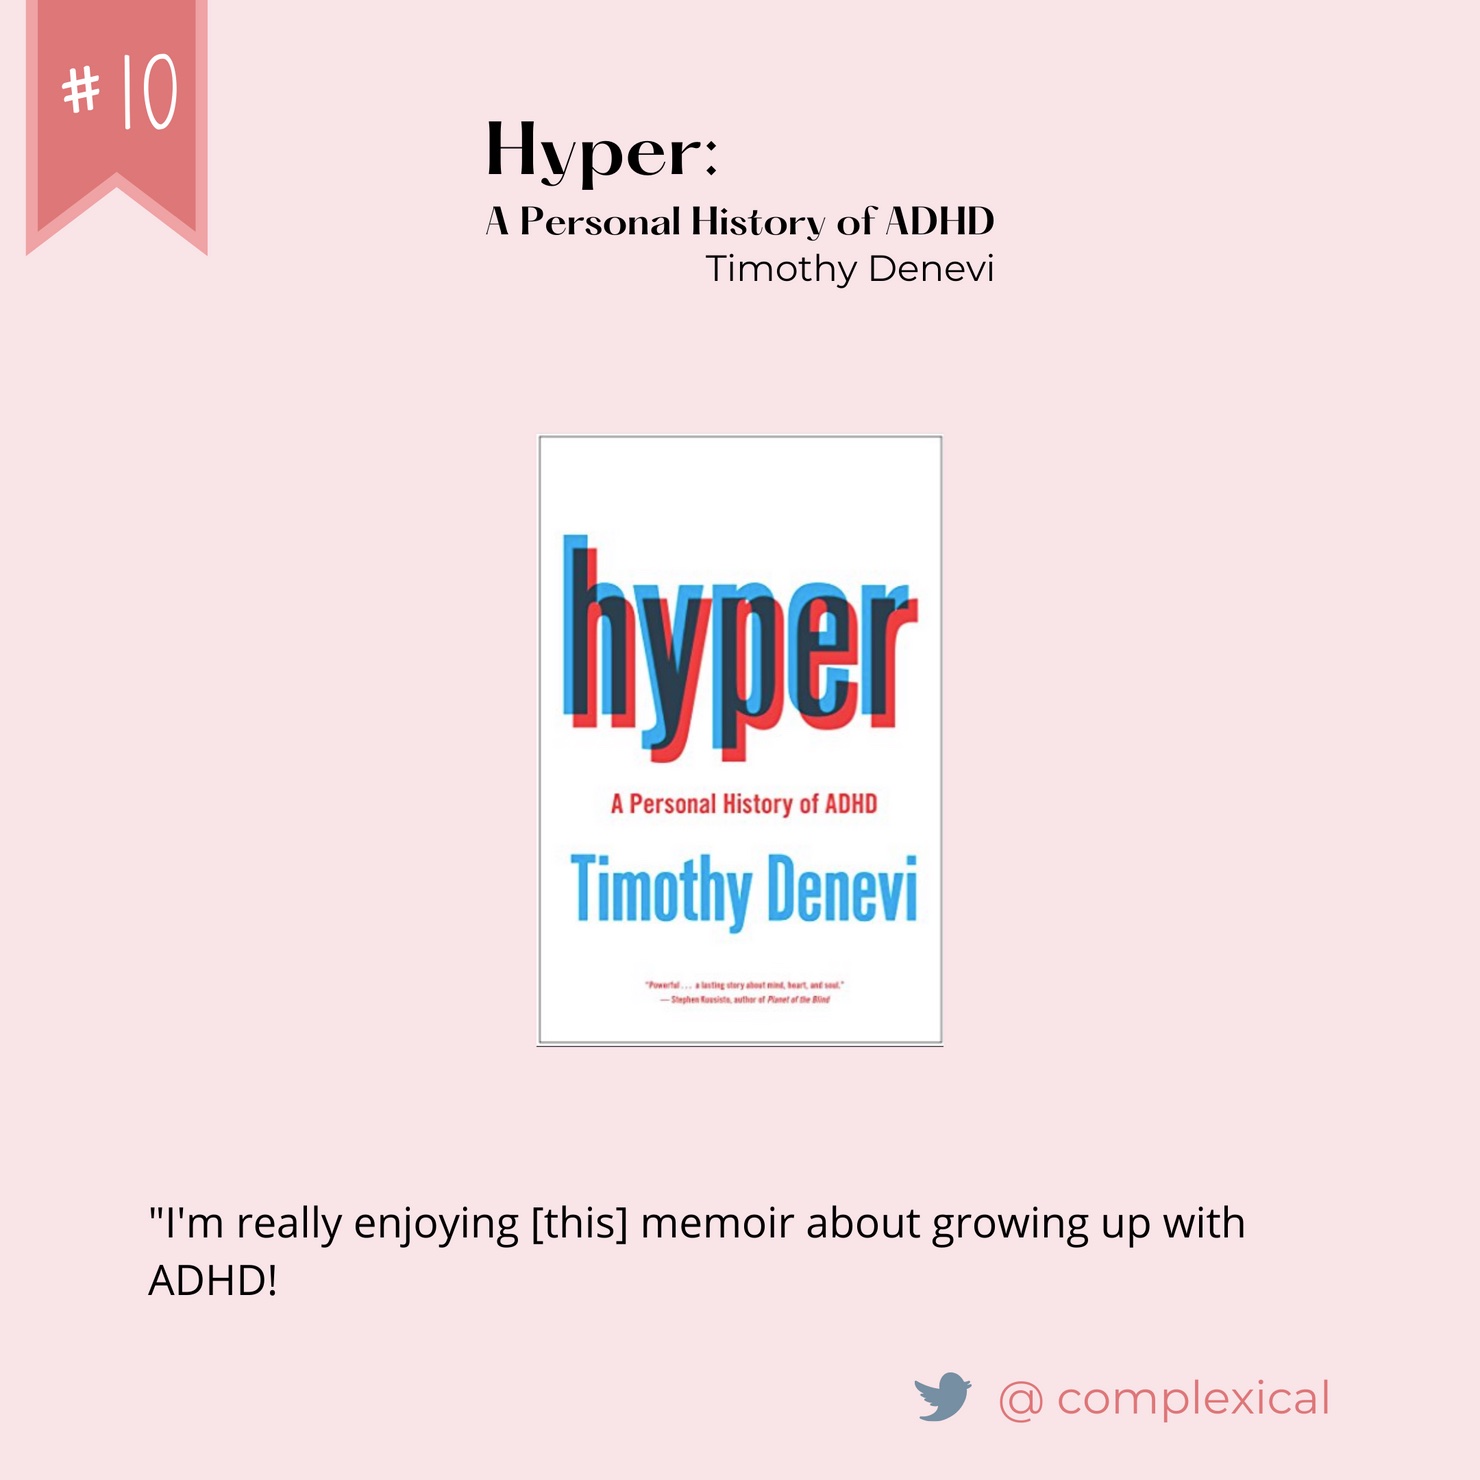 Number 10: Hyper - a personal history of ADHD. Quote from @complexical on Twitter: "I'm really enjoying [this] memoir about growing up with ADHD! 